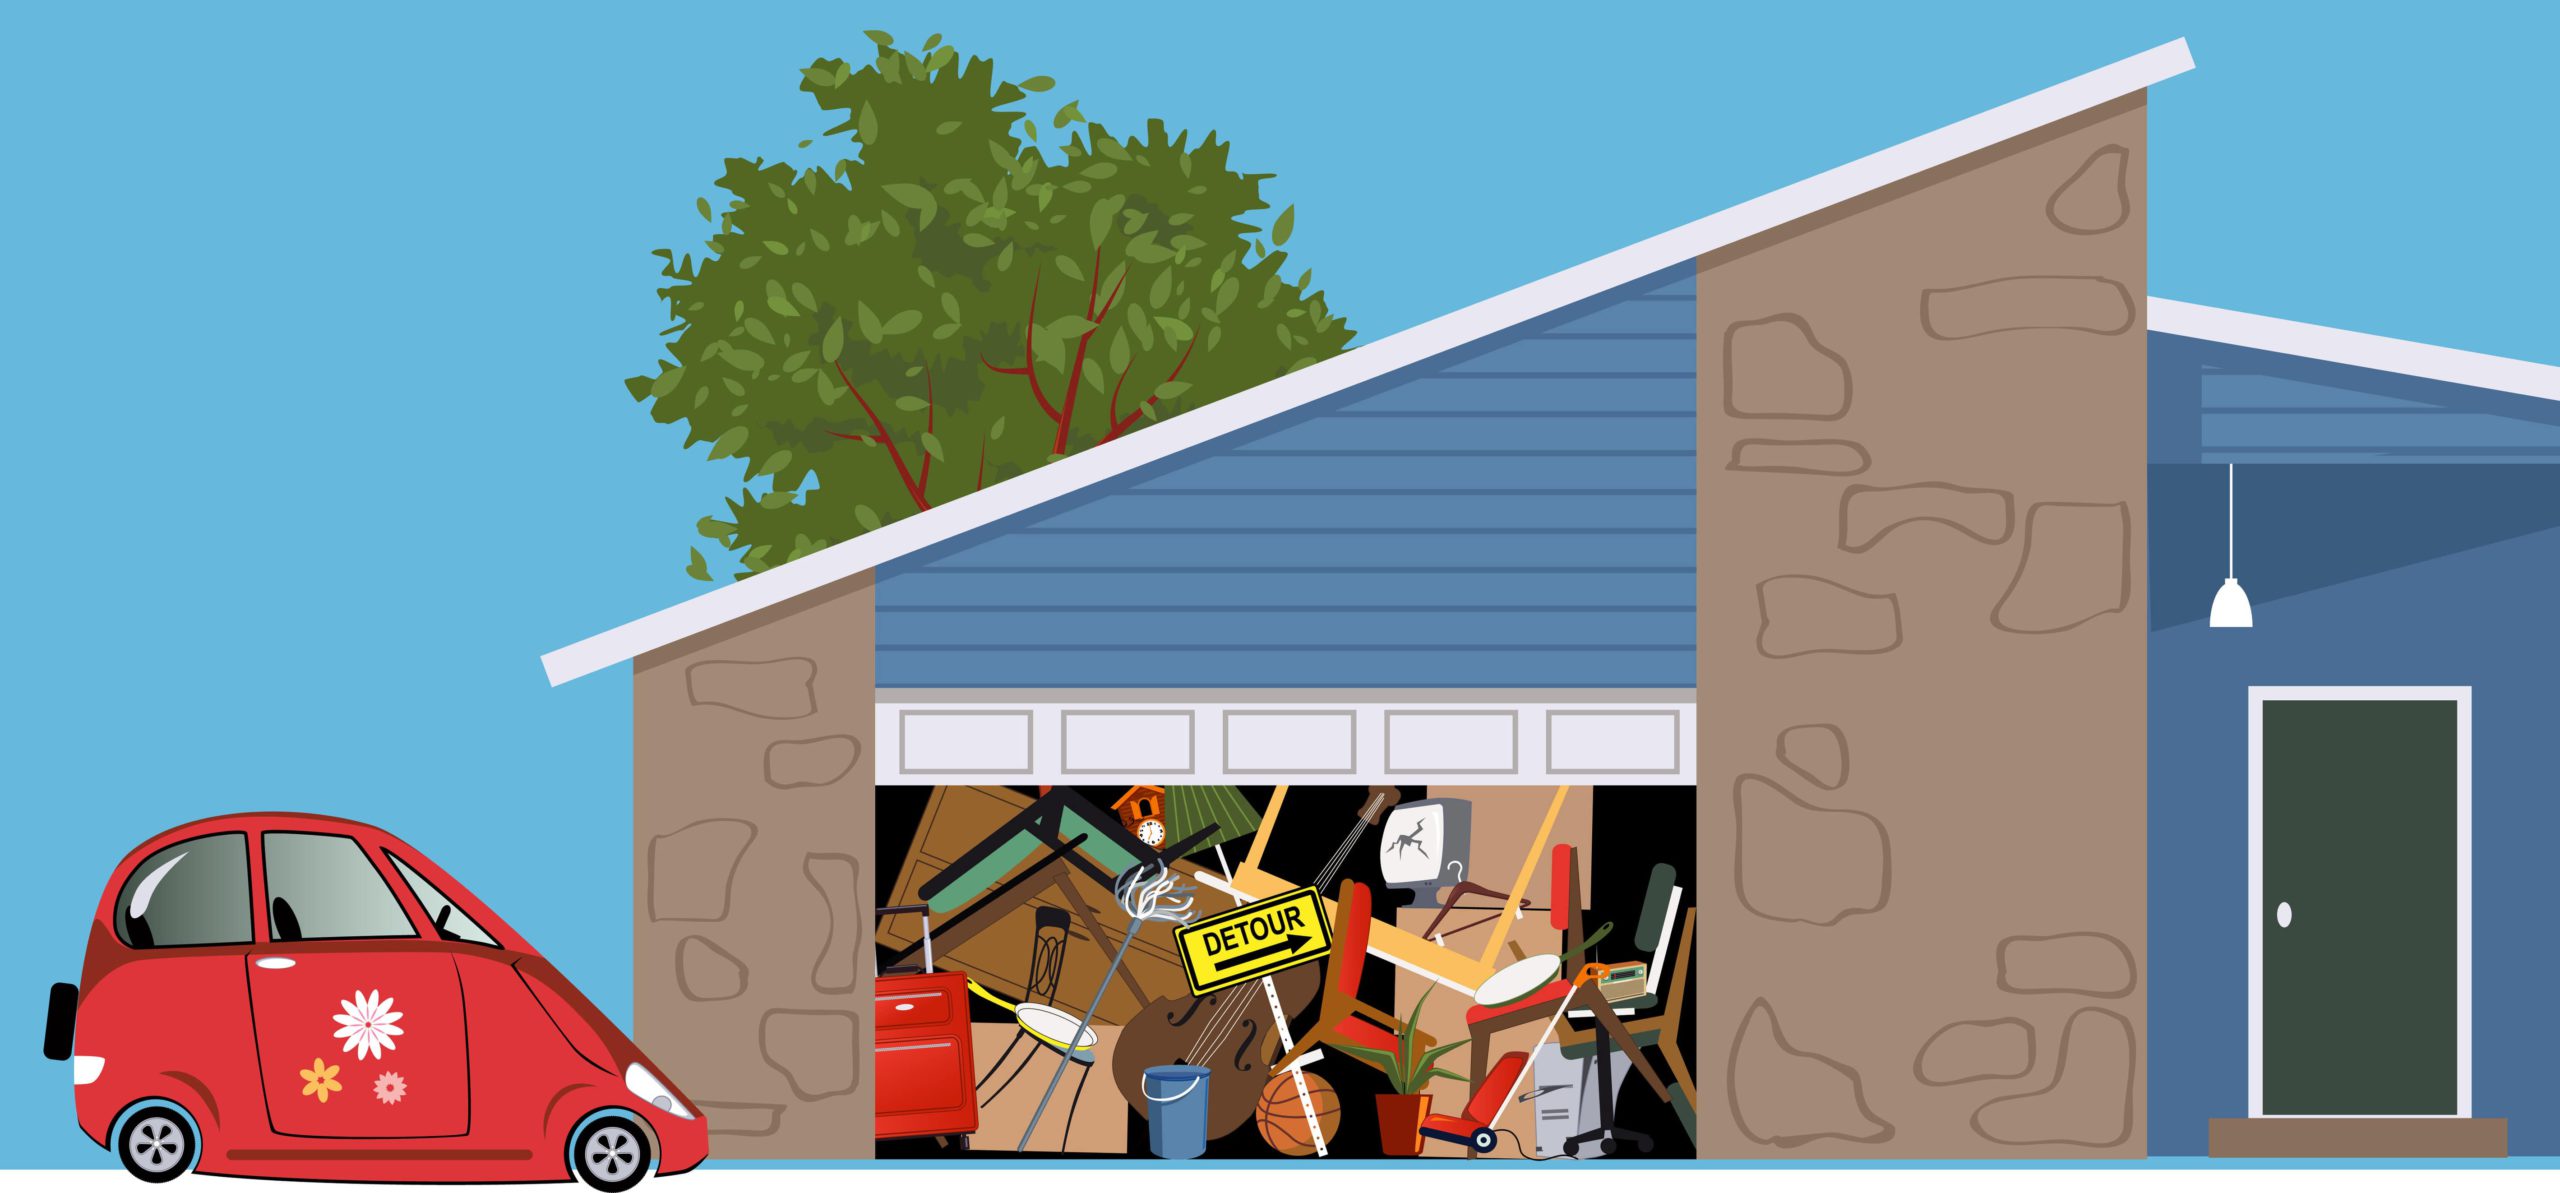 Hoarding Cleaning Des Plaines IL - Emergency Hoarder Cleaning services in Des Plaines IL